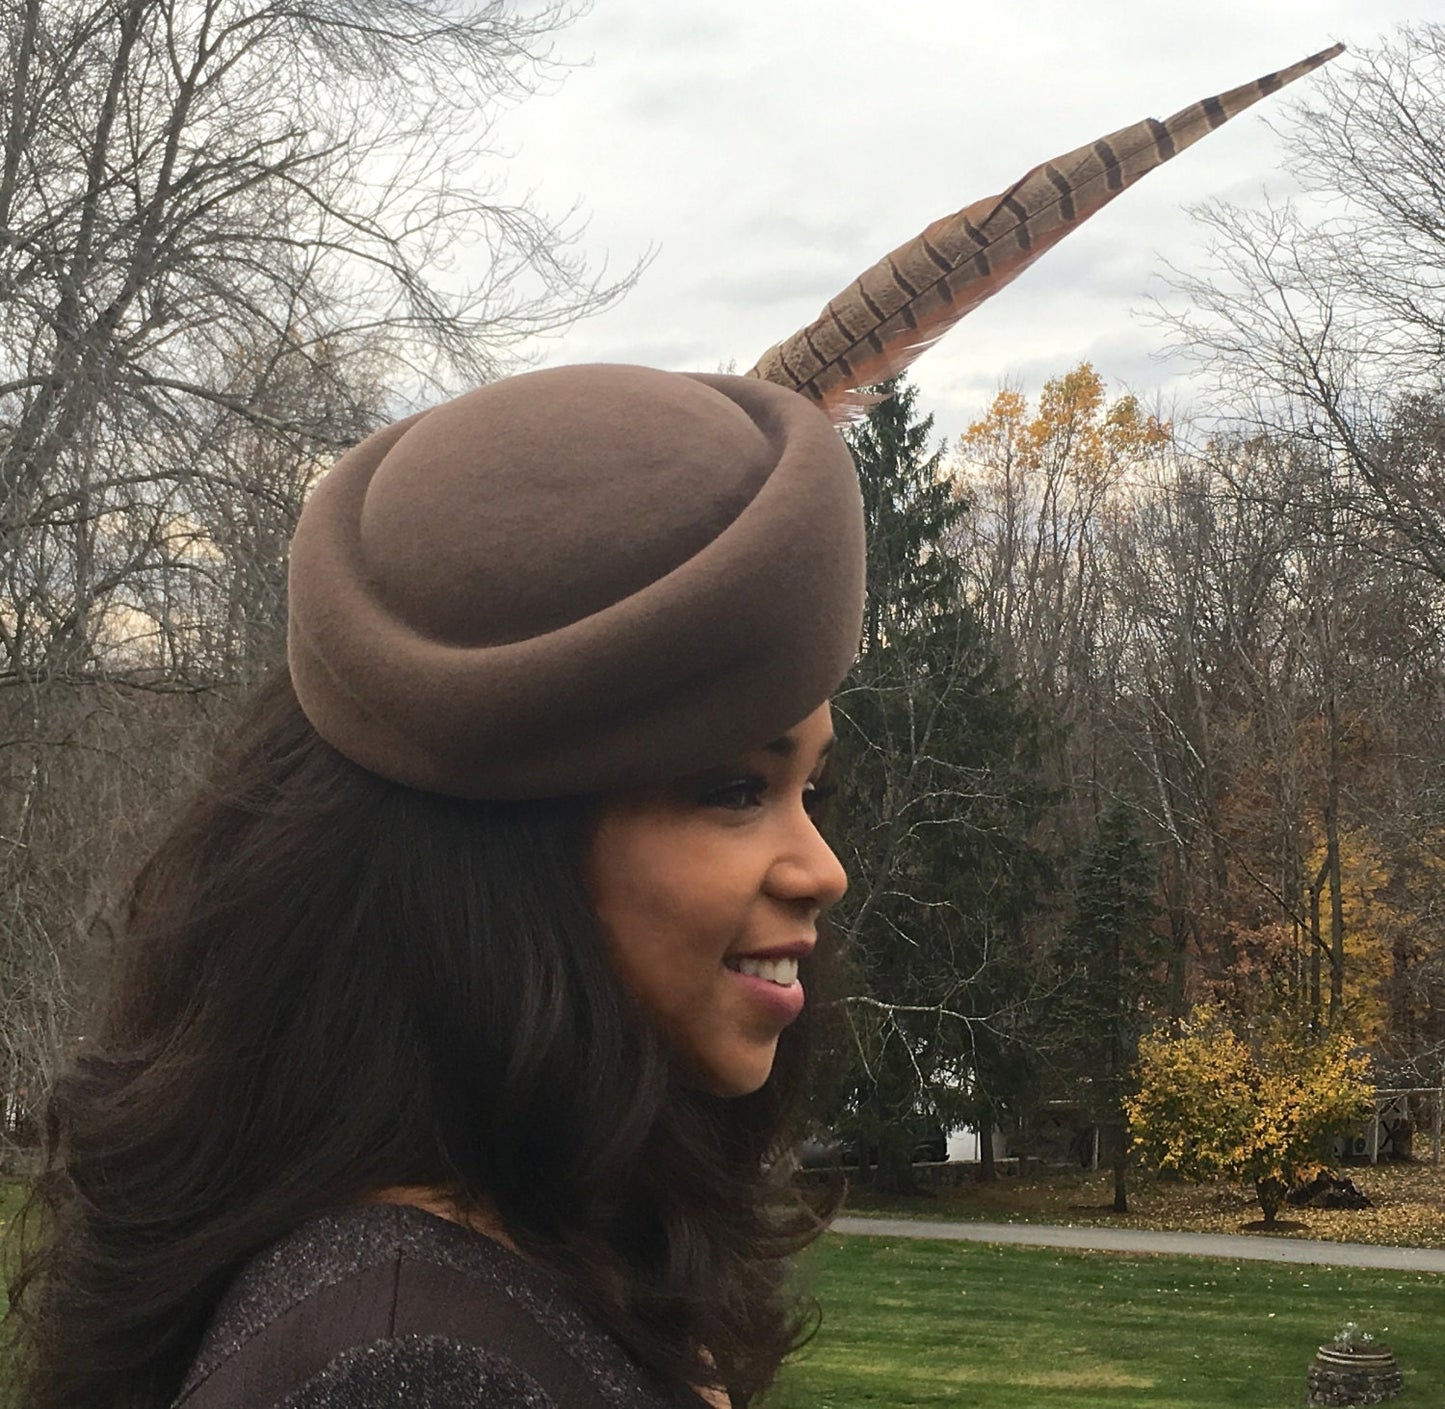 Taupe Sculptured Vintage Styled Pillbox Hat with Pheasant Feather! Great Church Hat-Winter Racetrack Hat- Mother of the Bride- Dress Hat